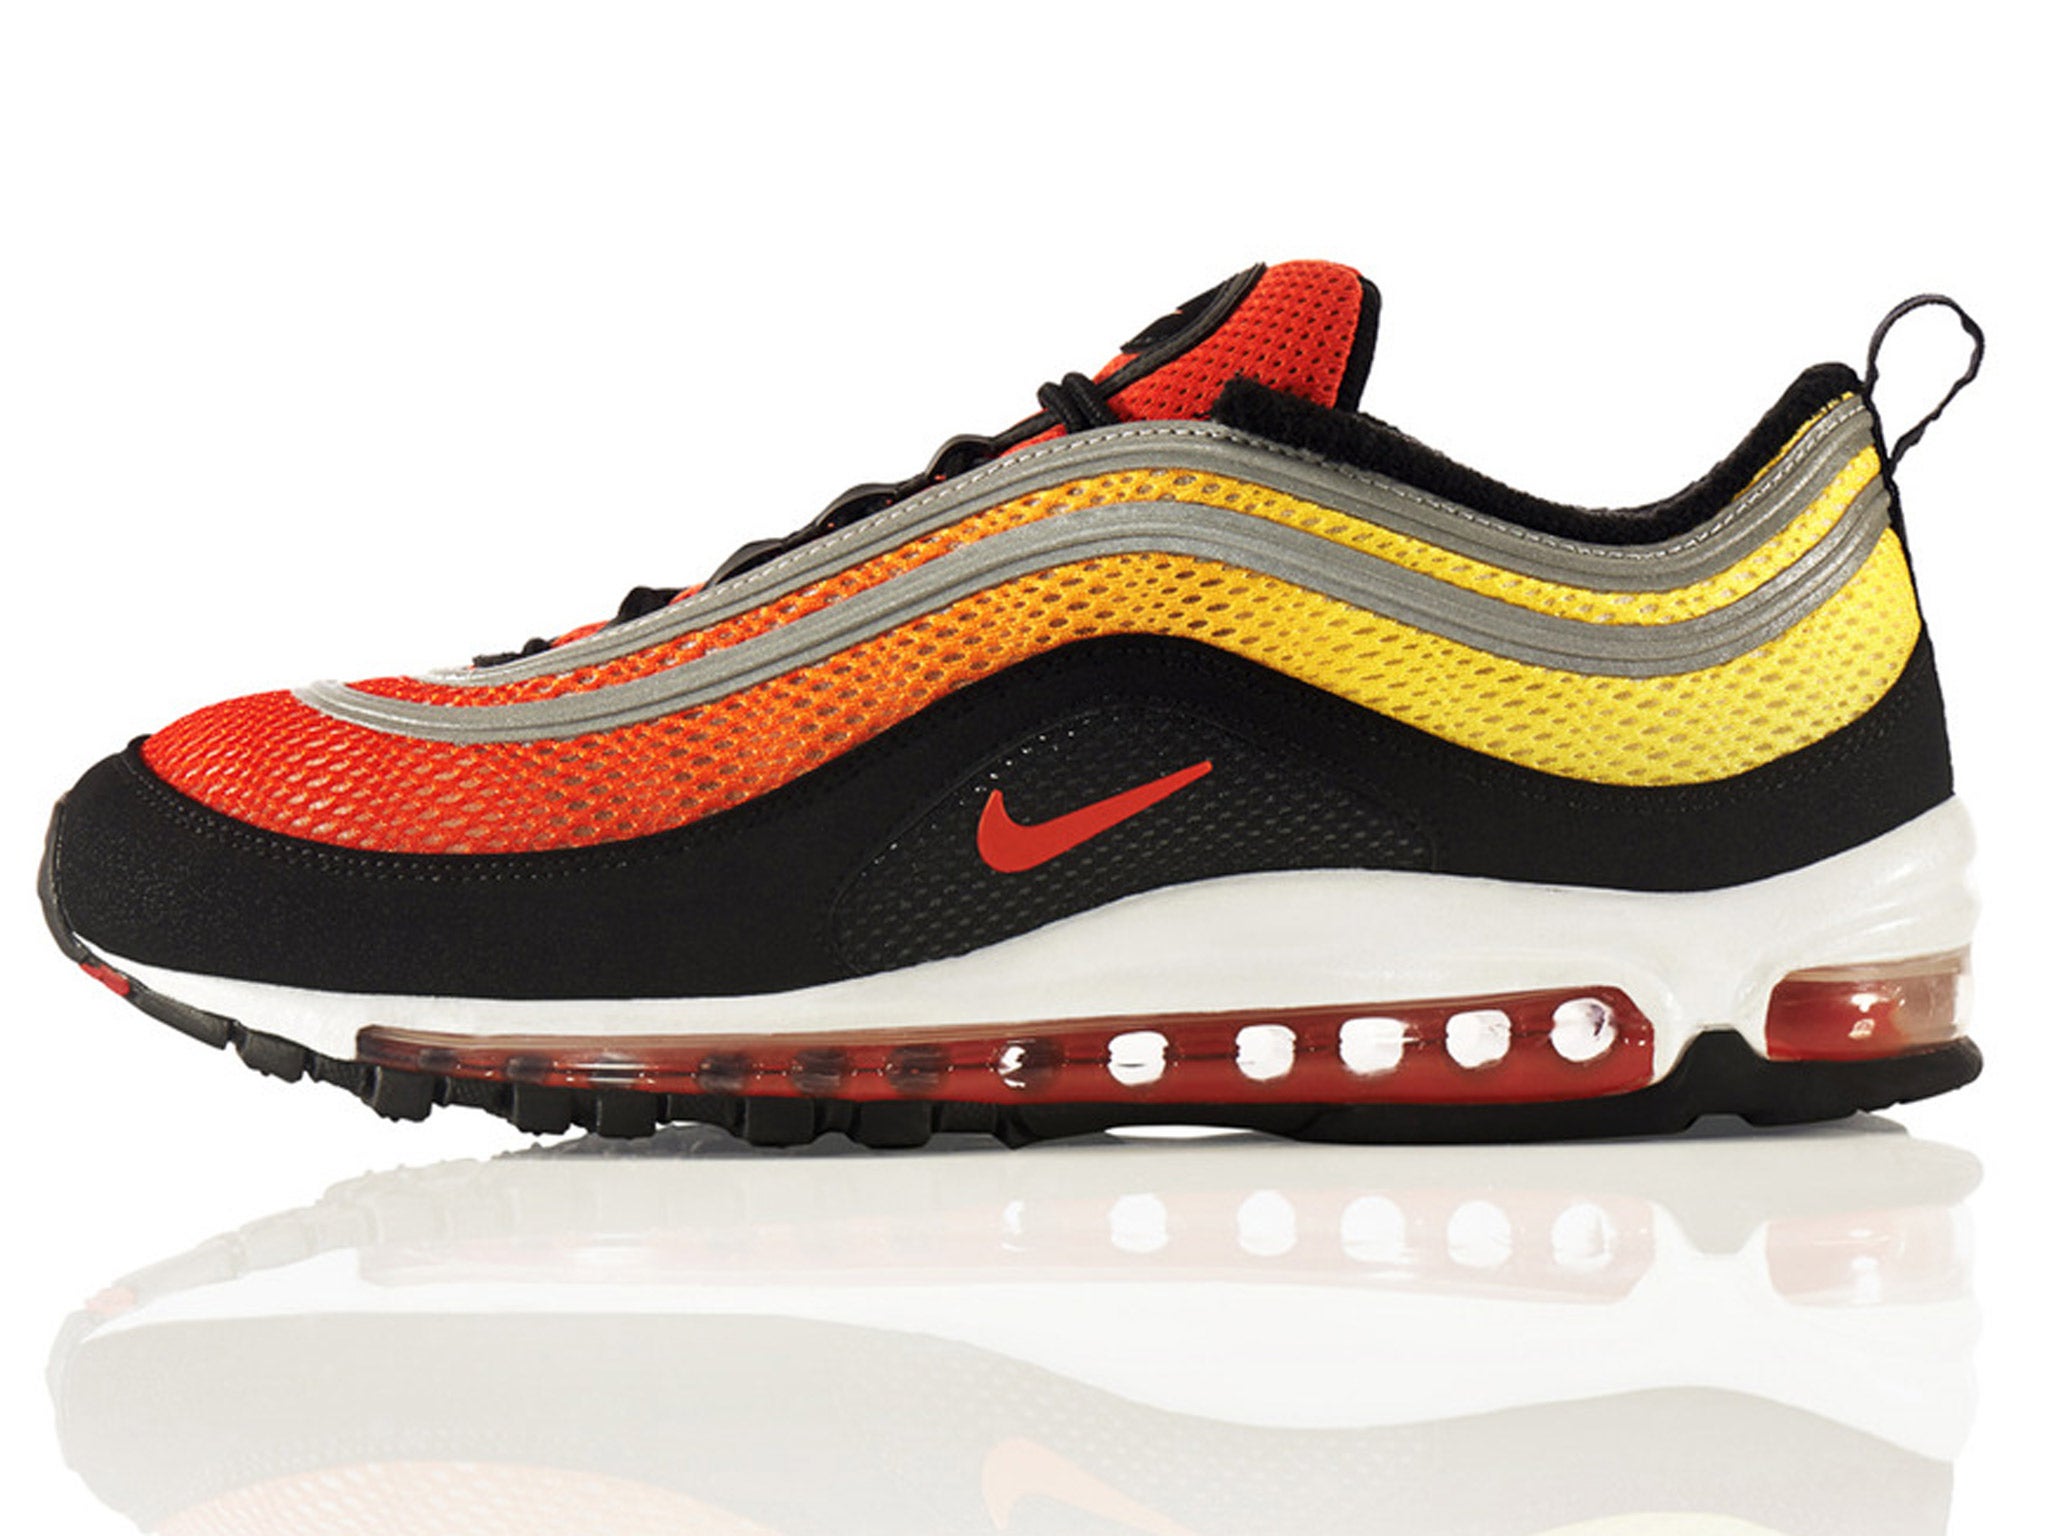 Nike Air Max trainers: The return of 